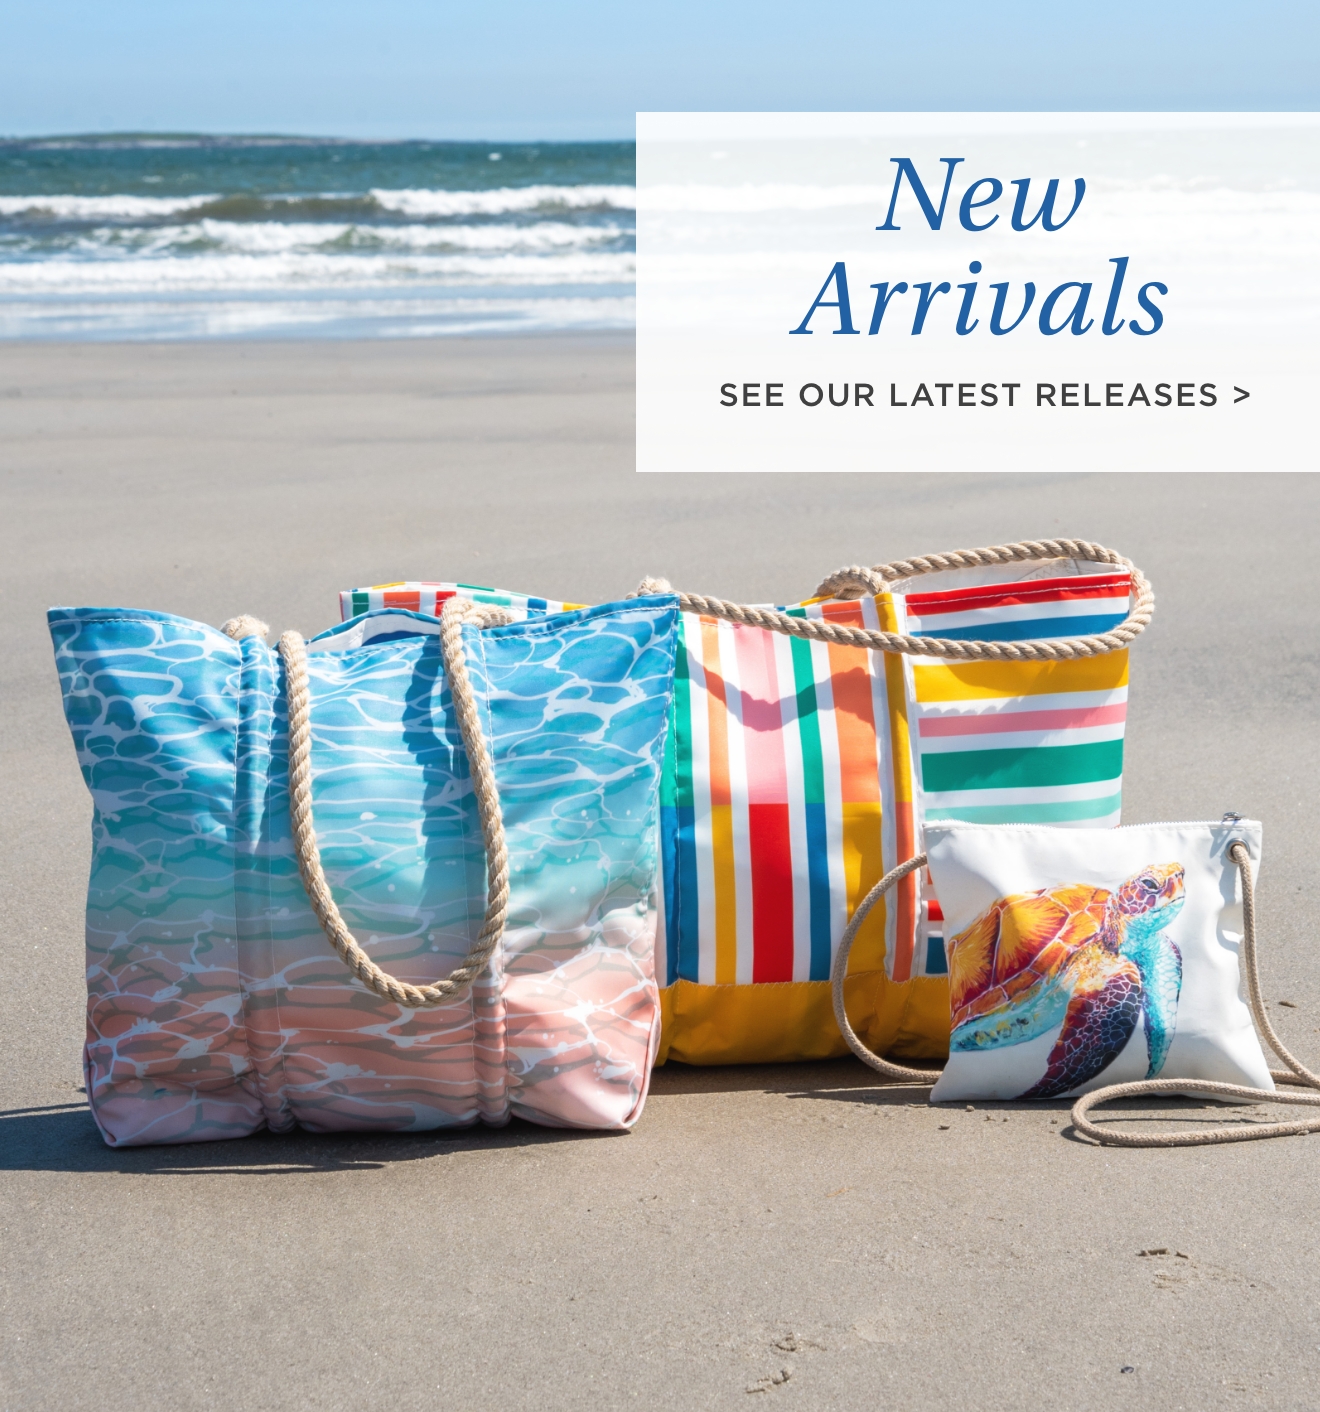 New Arrivals Totes on Beach